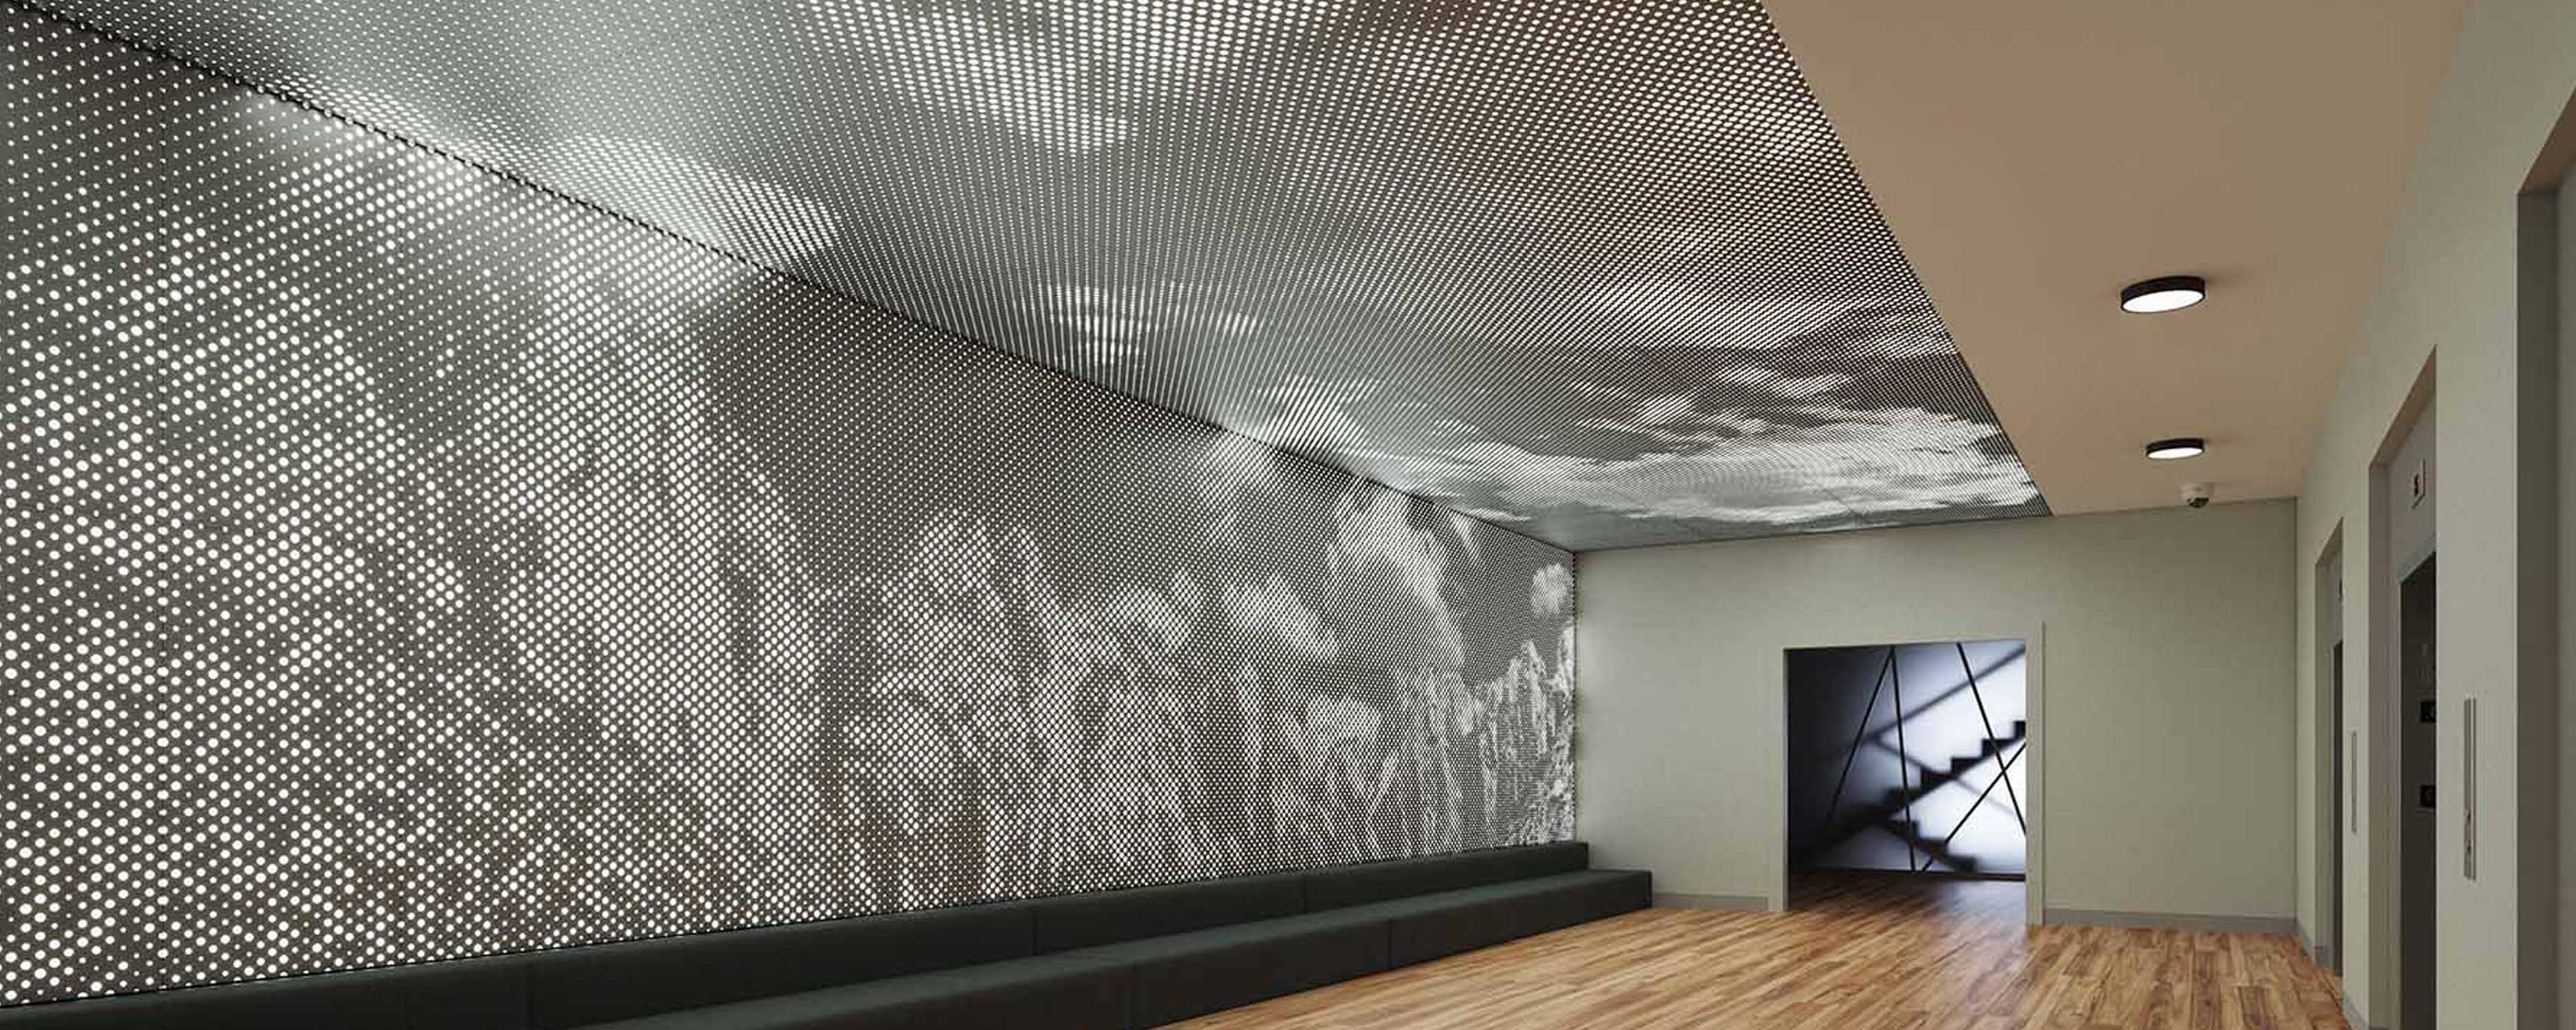 Architectural Wall Ceiling Panels Manufacturer Arktura